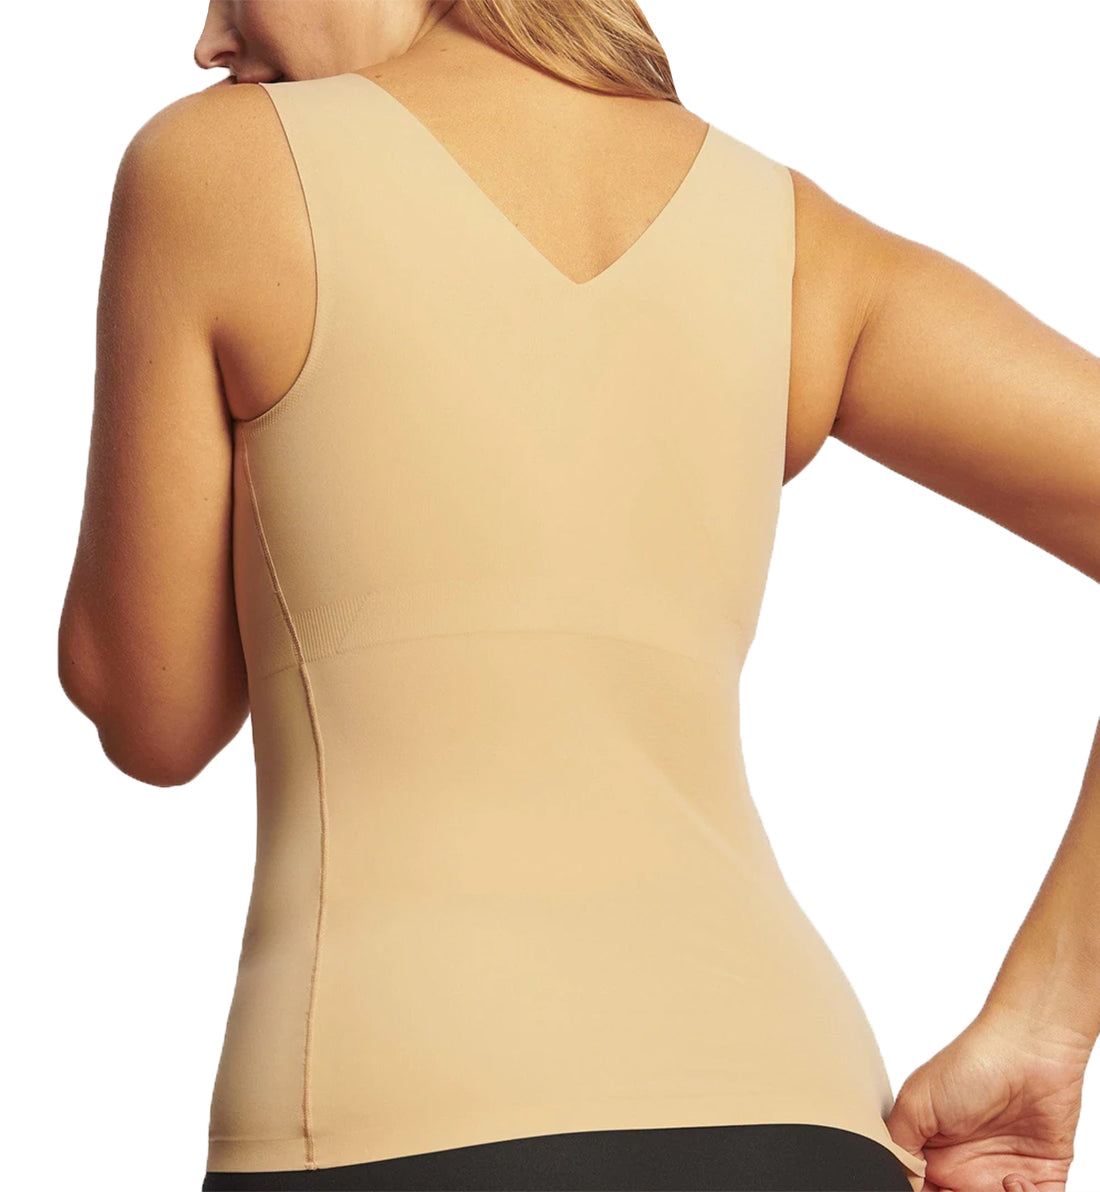 Evelyn & Bobbie Smoothing Cami (1829A),Small,Sand - Sand,Small